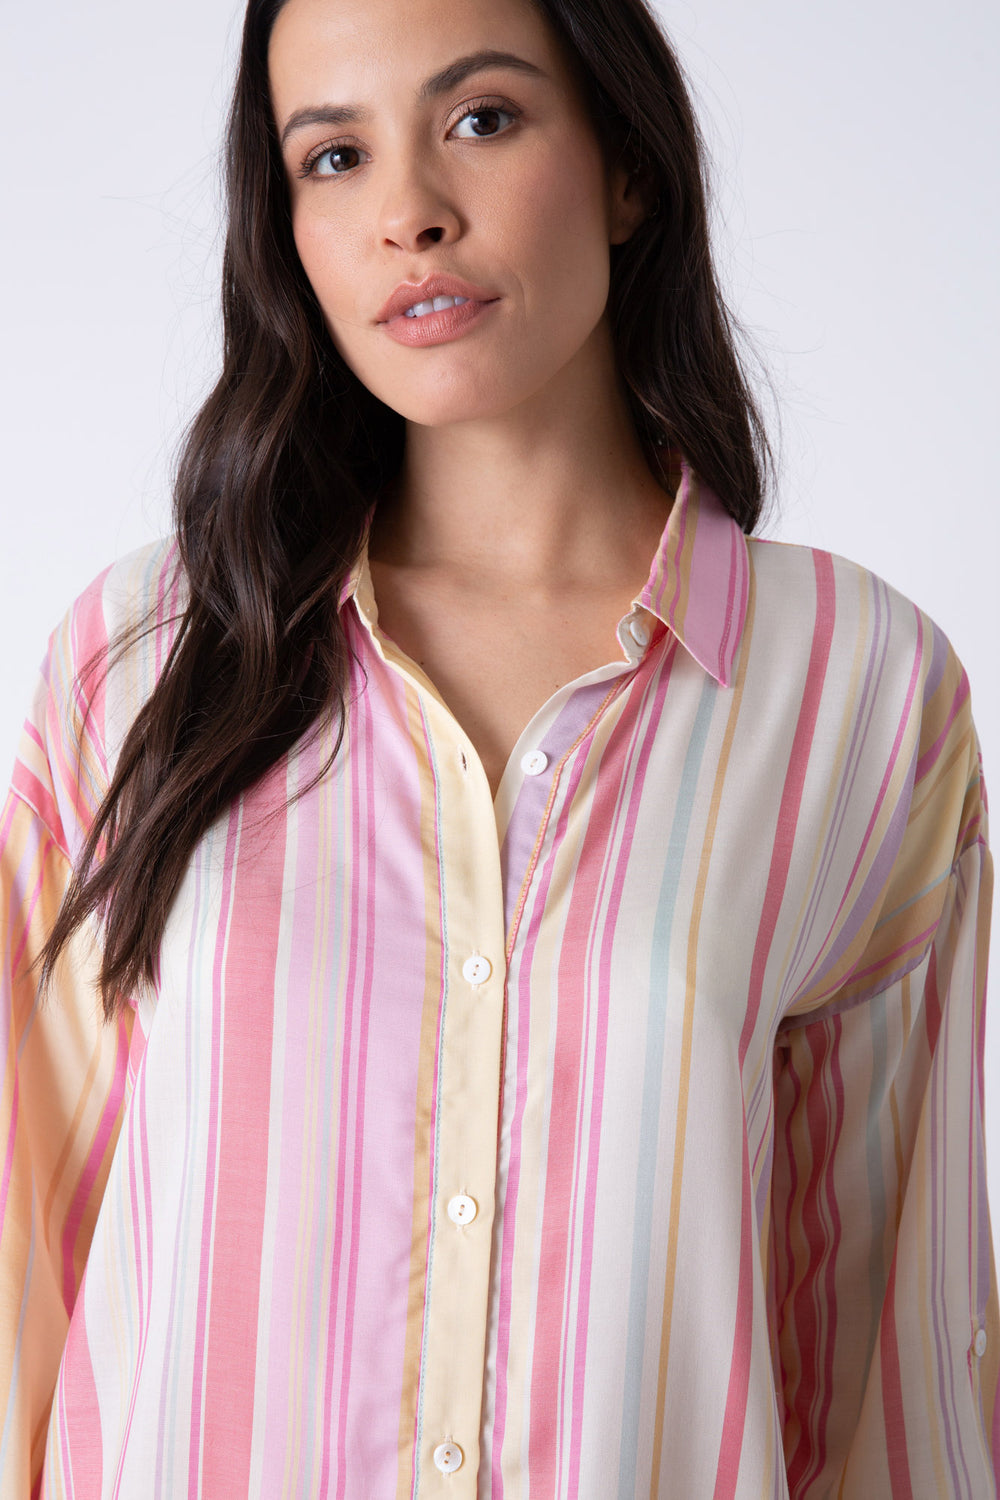 Women's striped button down shirt in pink-peach-natural. Collar & roll-up tab sleeve.